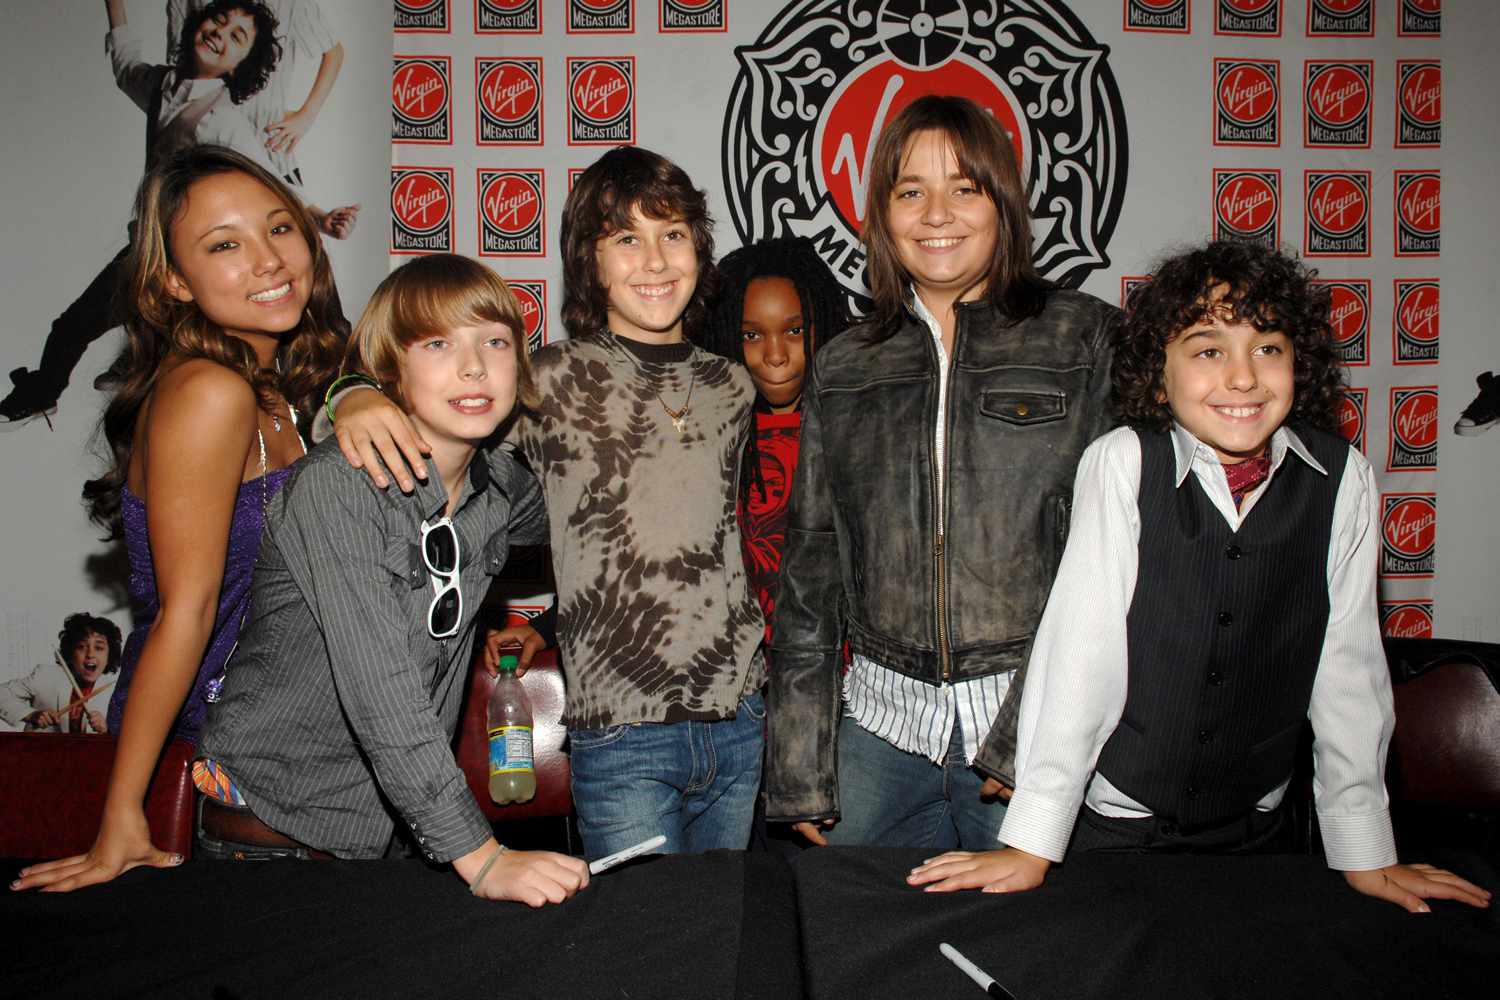 Allie DiMeco, David Levi, Nat Wolff, Qaasim Middleton, Thomas Batuello and Alex Wolff of Nickelodeon's The Naked Brothers Band appear in-store at the Virgin Megastore on October 8, 2007 in New York City. 